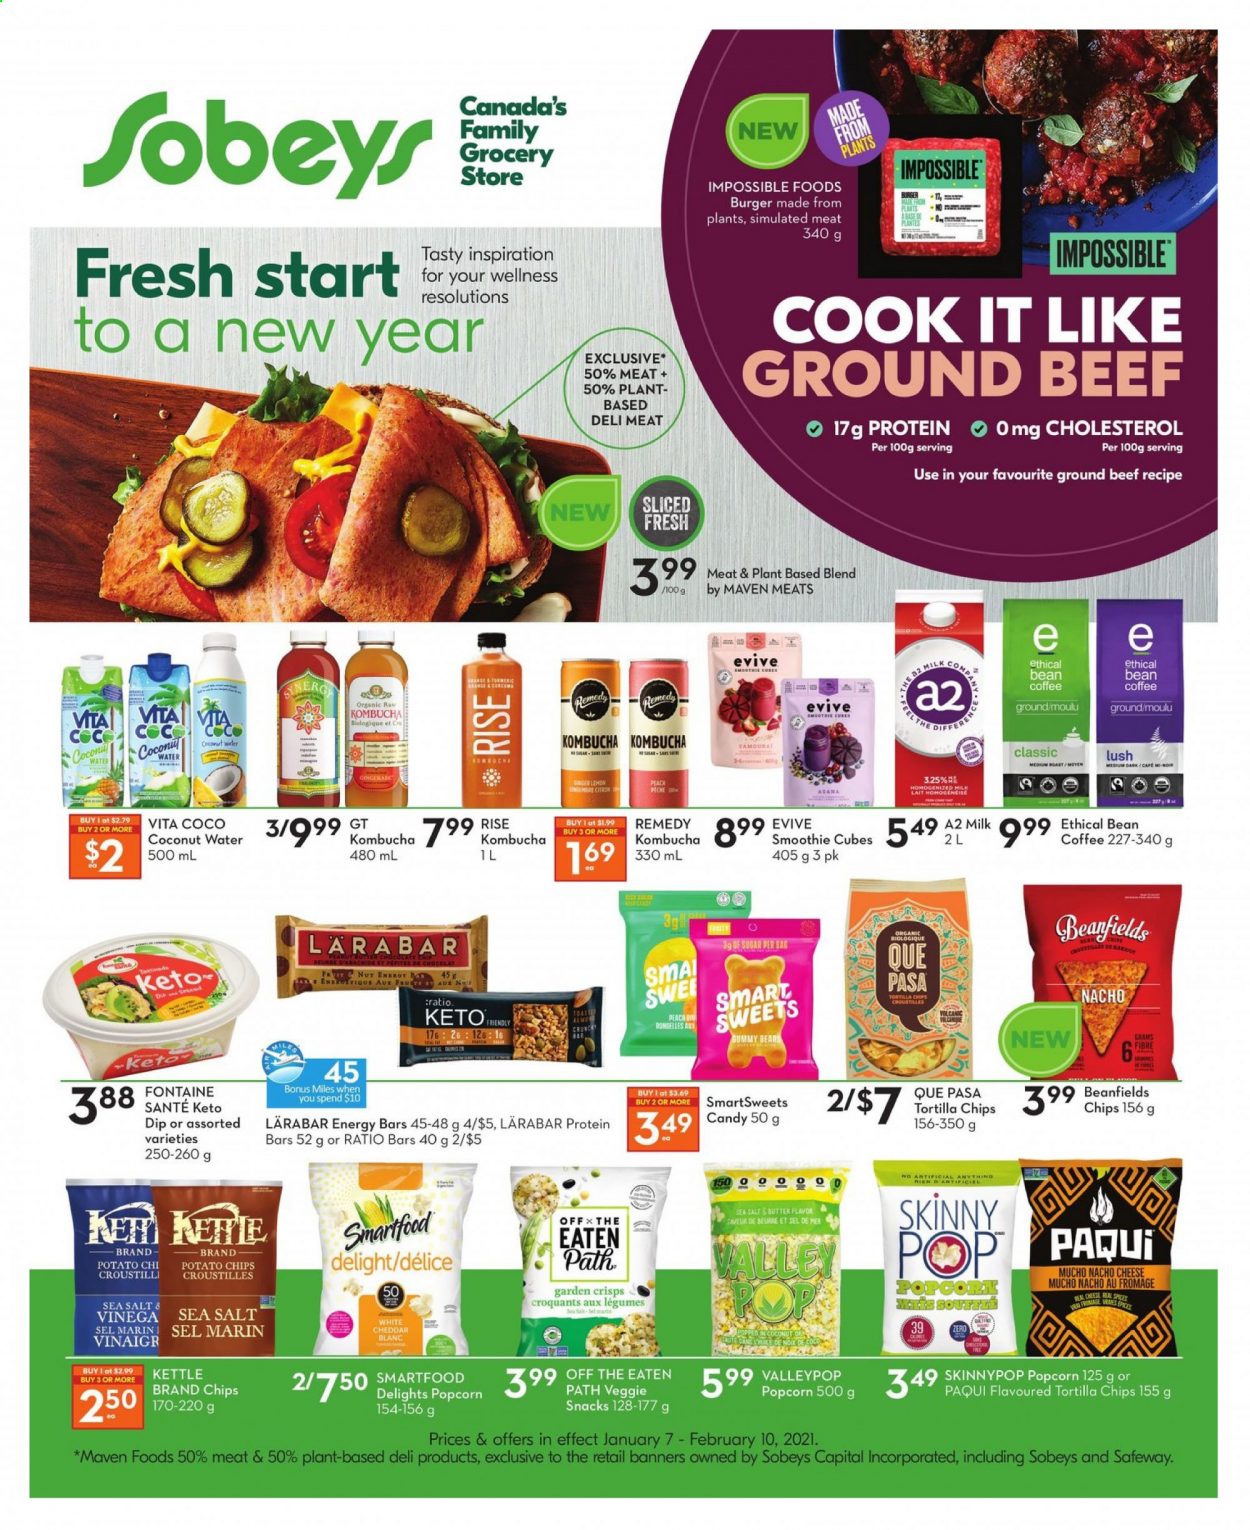 thumbnail - Sobeys Flyer - January 07, 2021 - February 10, 2021 - Sales products - ginger, hamburger, cheese, milk, butter, snack, tortilla chips, Smartfood, popcorn, Skinny Pop, sugar, protein bar, energy bar, turmeric, coconut water, smoothie, kombucha, coffee, beef meat, ground beef, bag, Ethical, chips. Page 1.